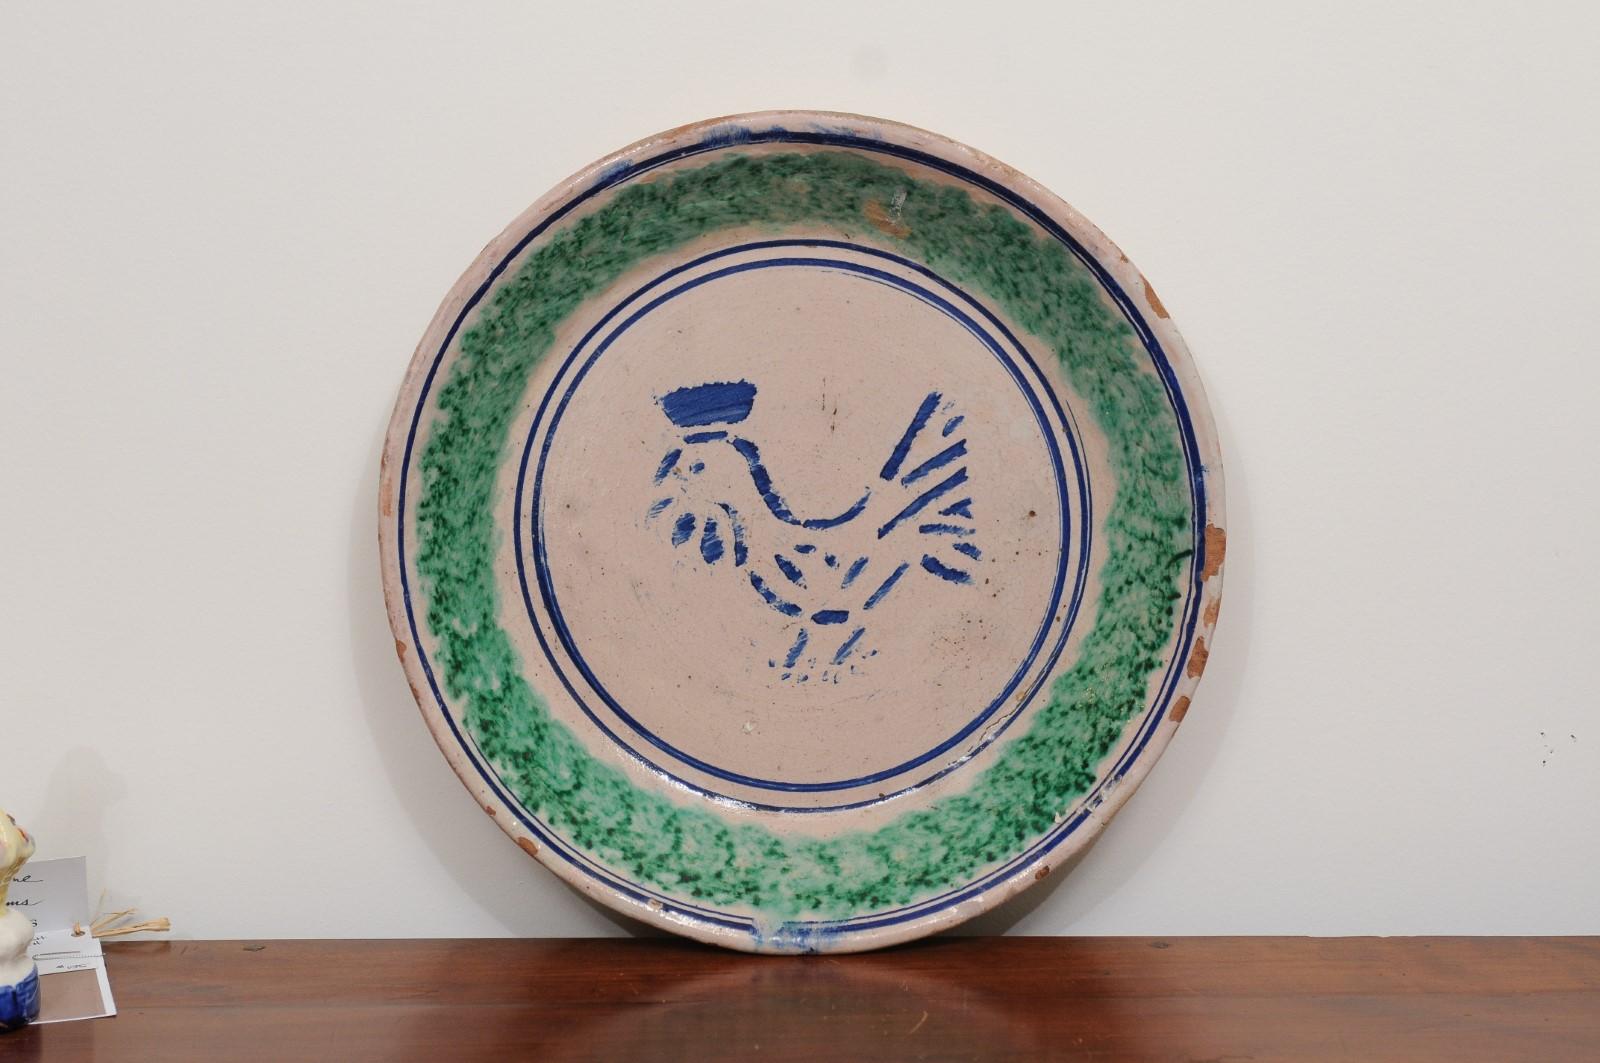 An Italian pottery plate from the 19th century, with stylized rooster and green accents. Created in Italy during the 19th century, this pottery plate features blue and green tones alternating with one another. A blue rooster is depicted in profile